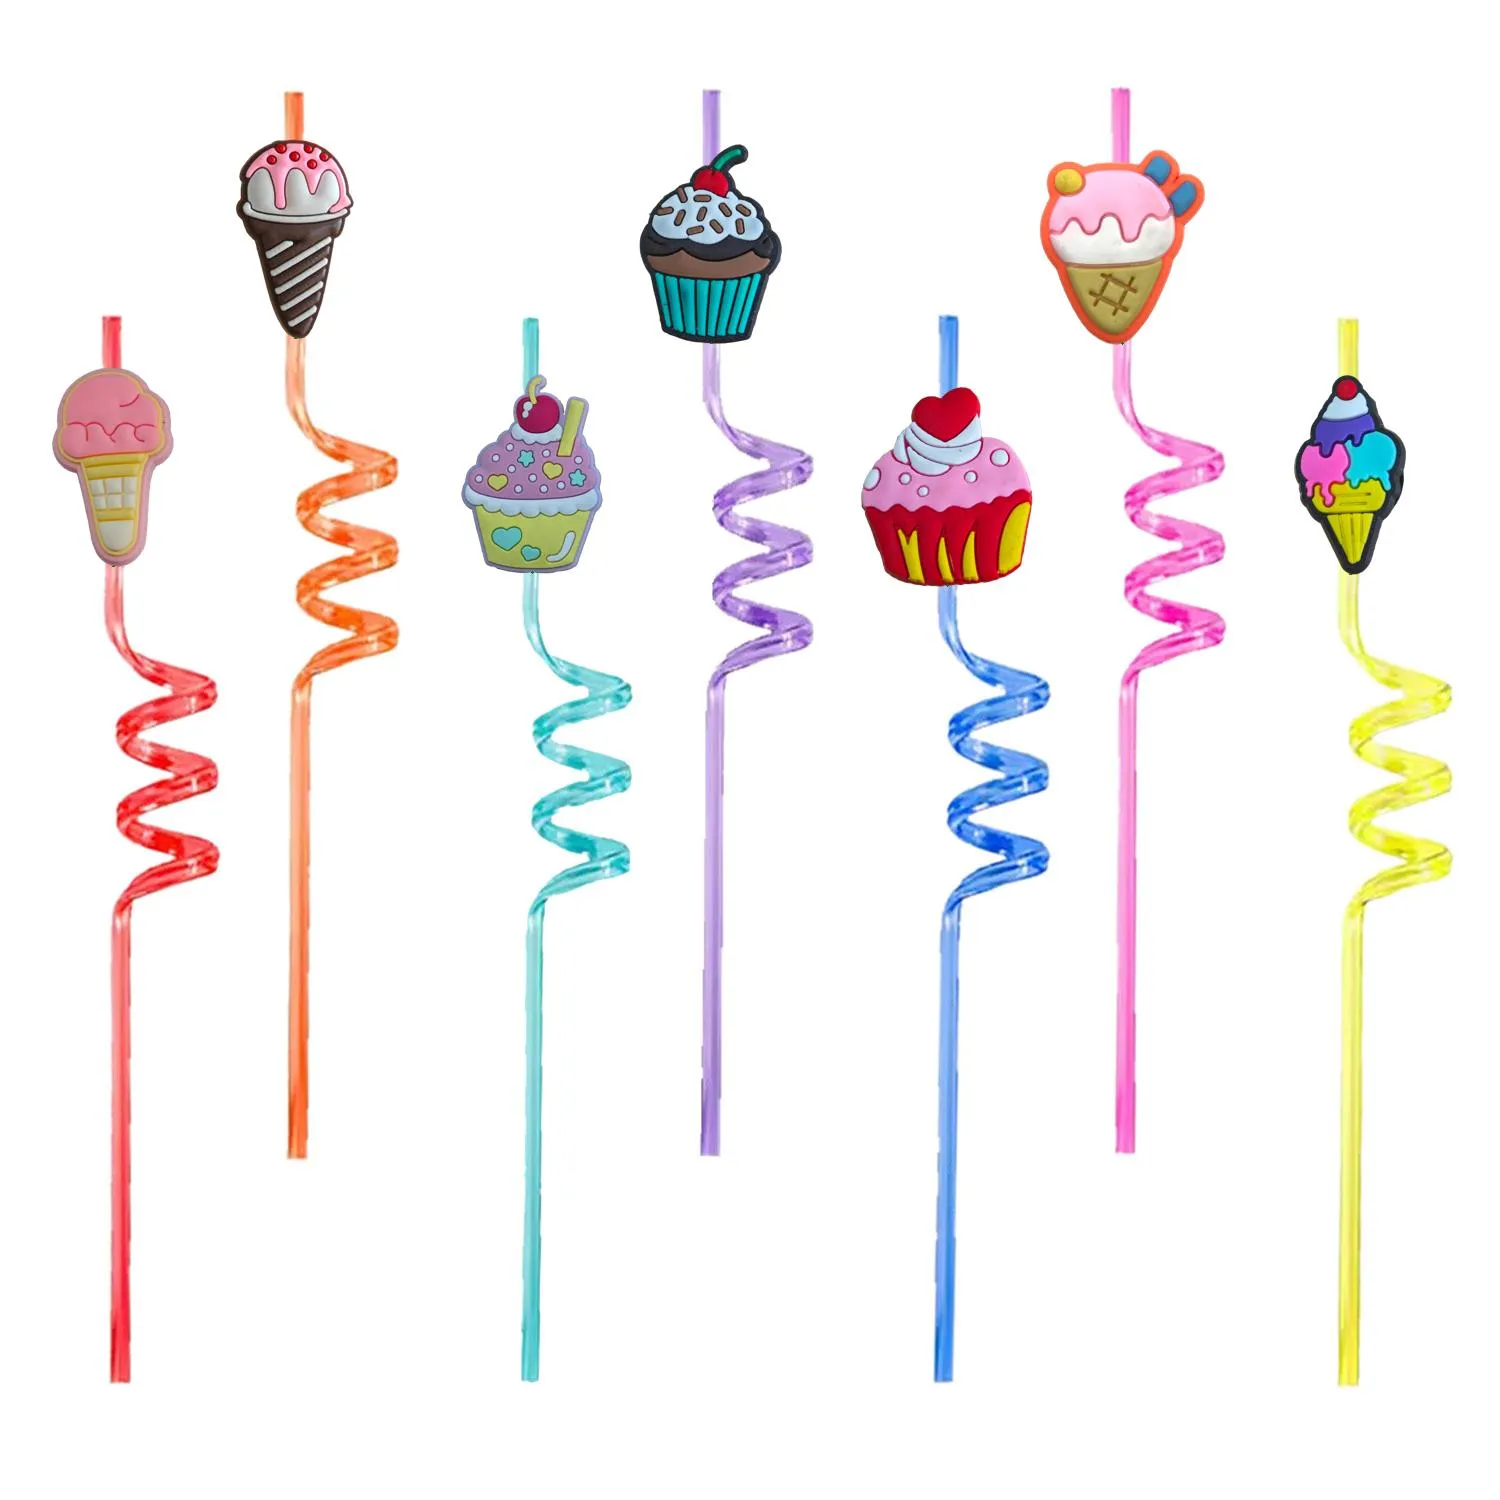 Disposable Plastic Sts Ice Cream Themed Tamed Crazy Cartoon St Girls Party Decorations Brinking for Kids Pool Birthday Supplies Favors OT7EQ